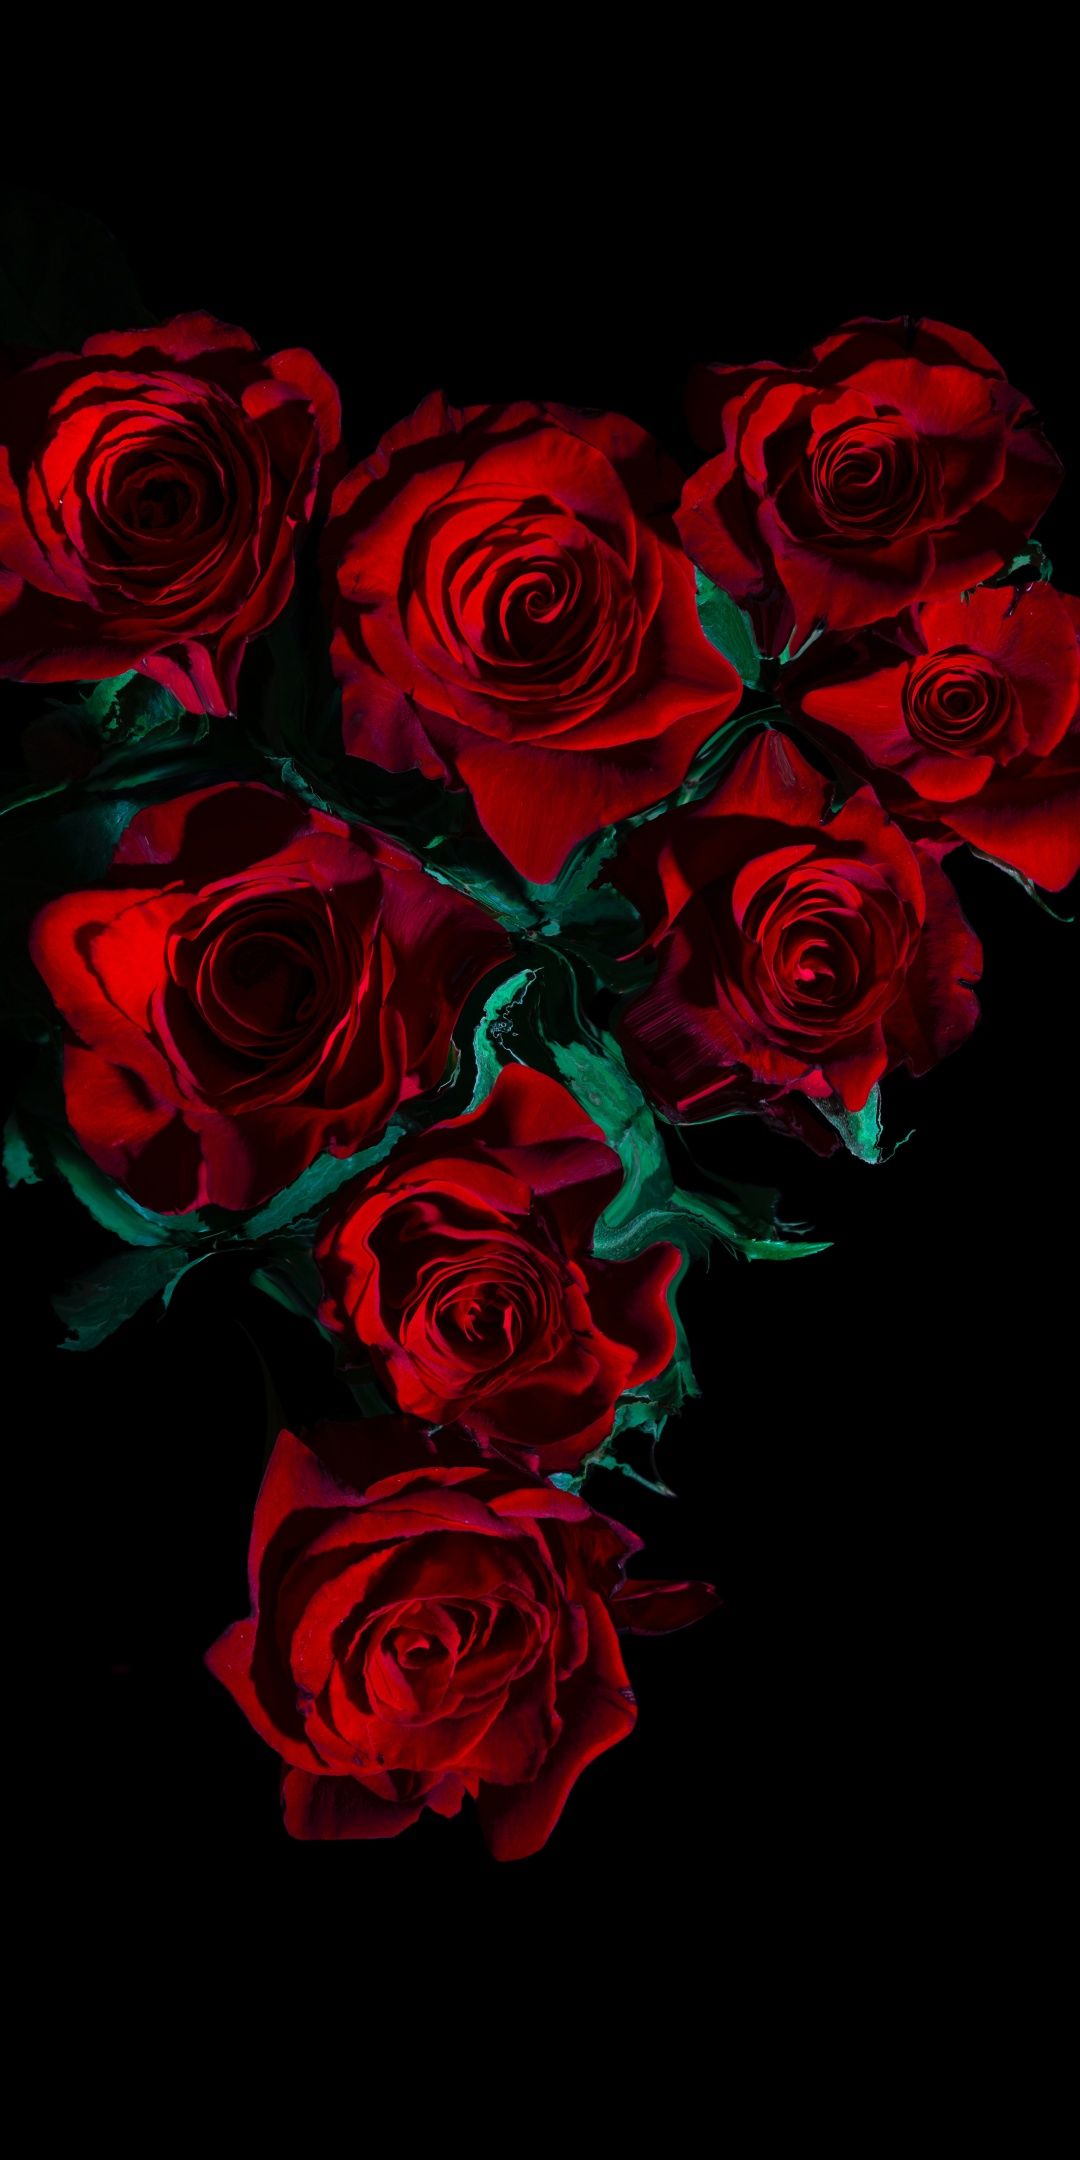 IPhone wallpaper with beautiful red roses on a black background. - Roses